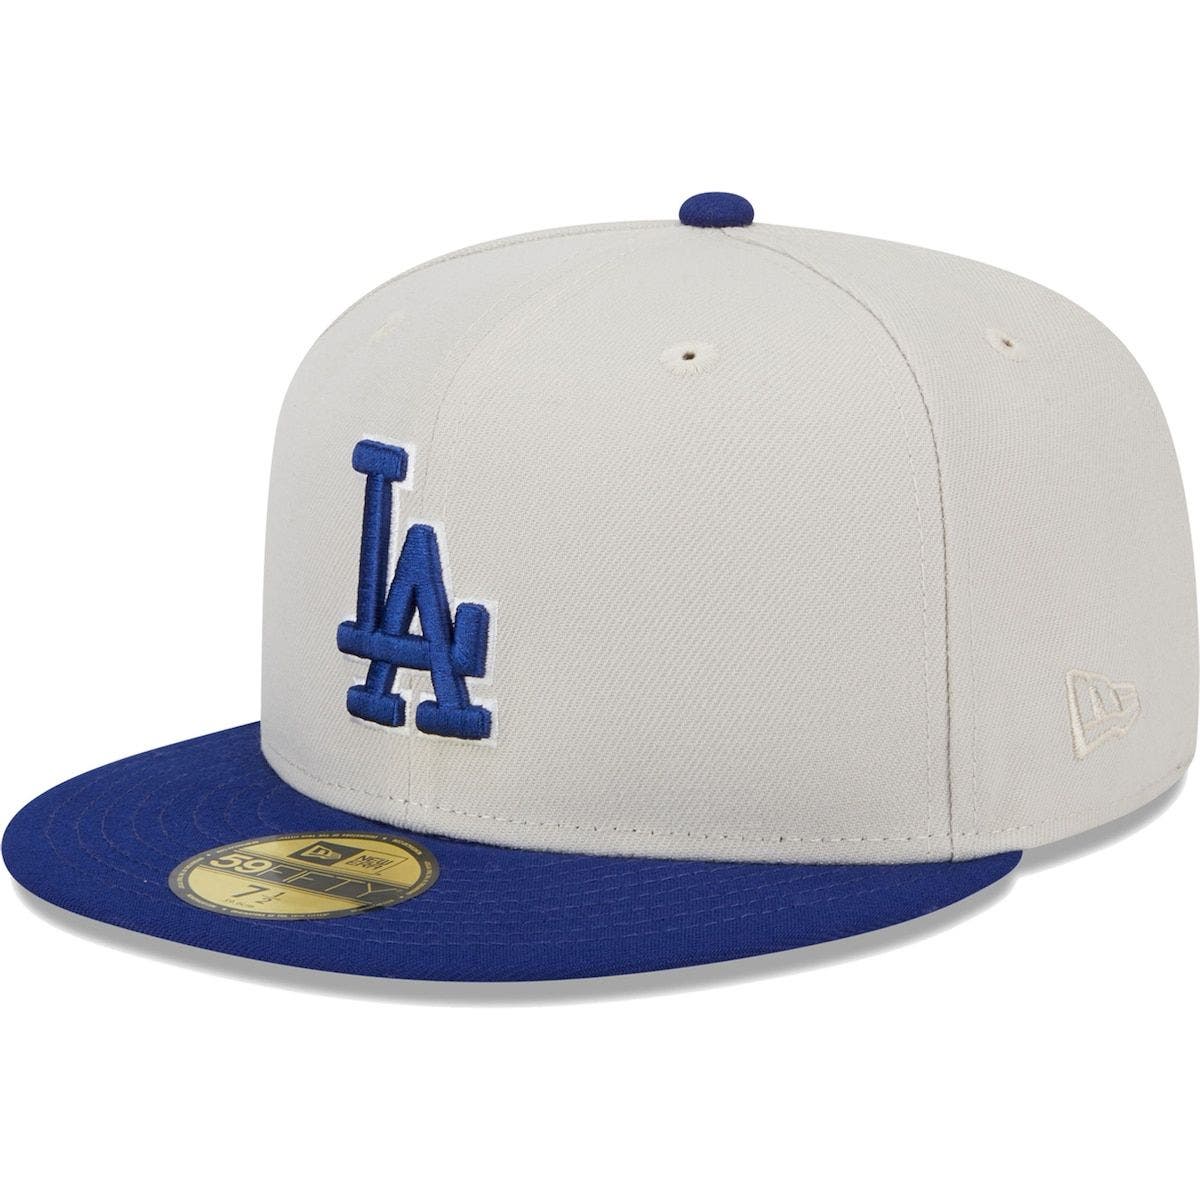 Los Angeles Dodgers 2021 Clubhouse Royal 59FIFTY Fitted Hat